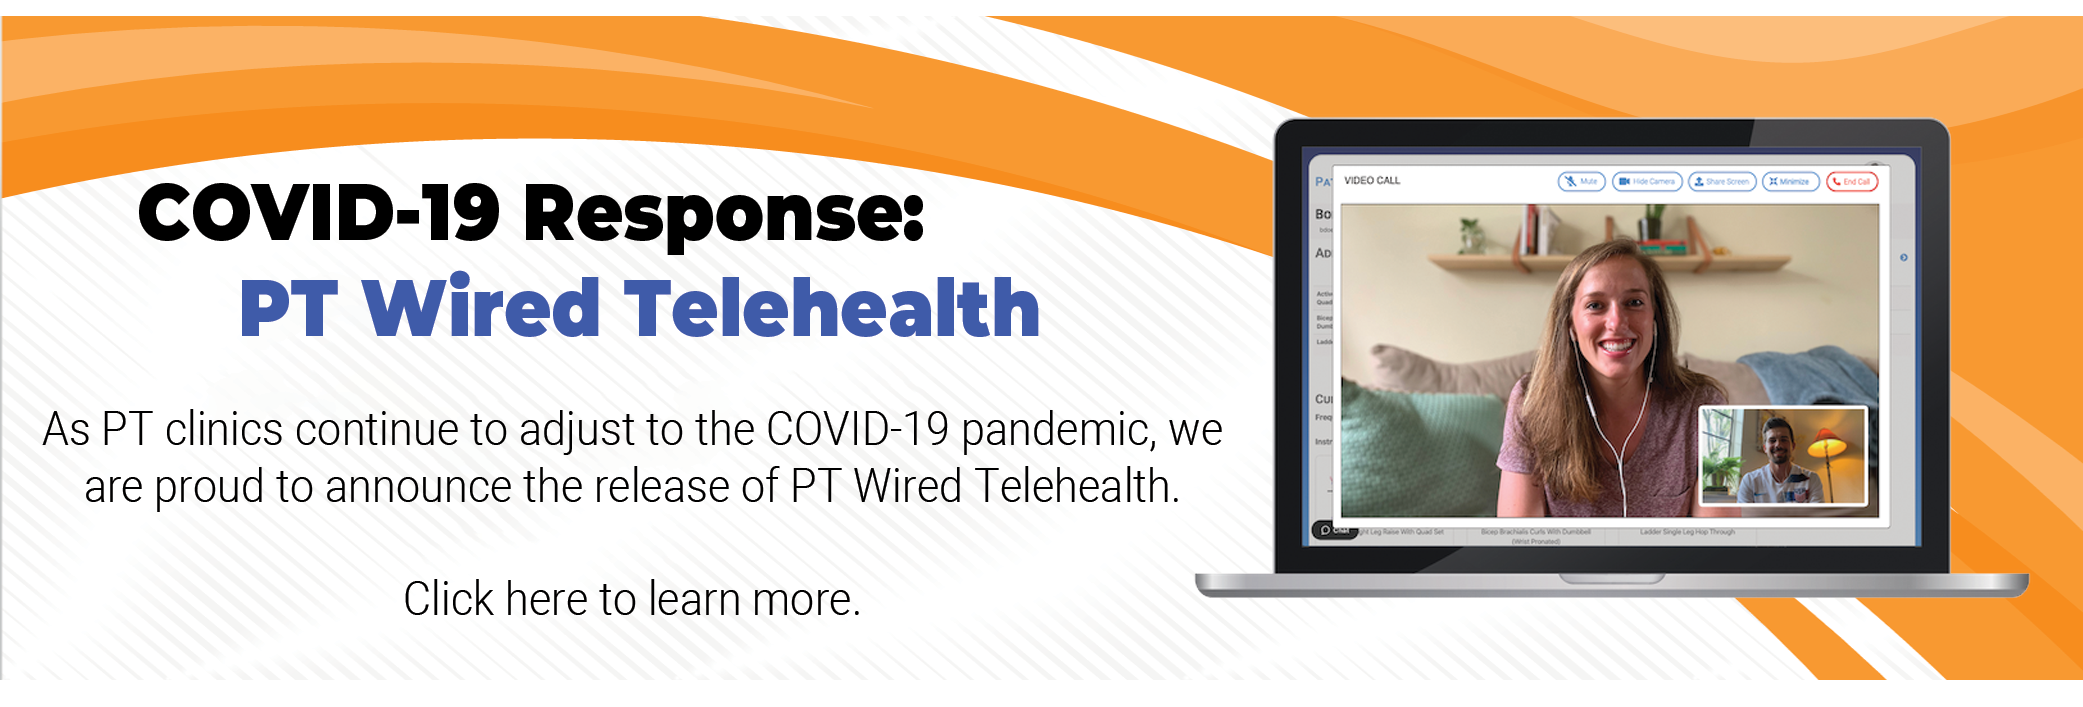 PT Wired Covid-19 Response